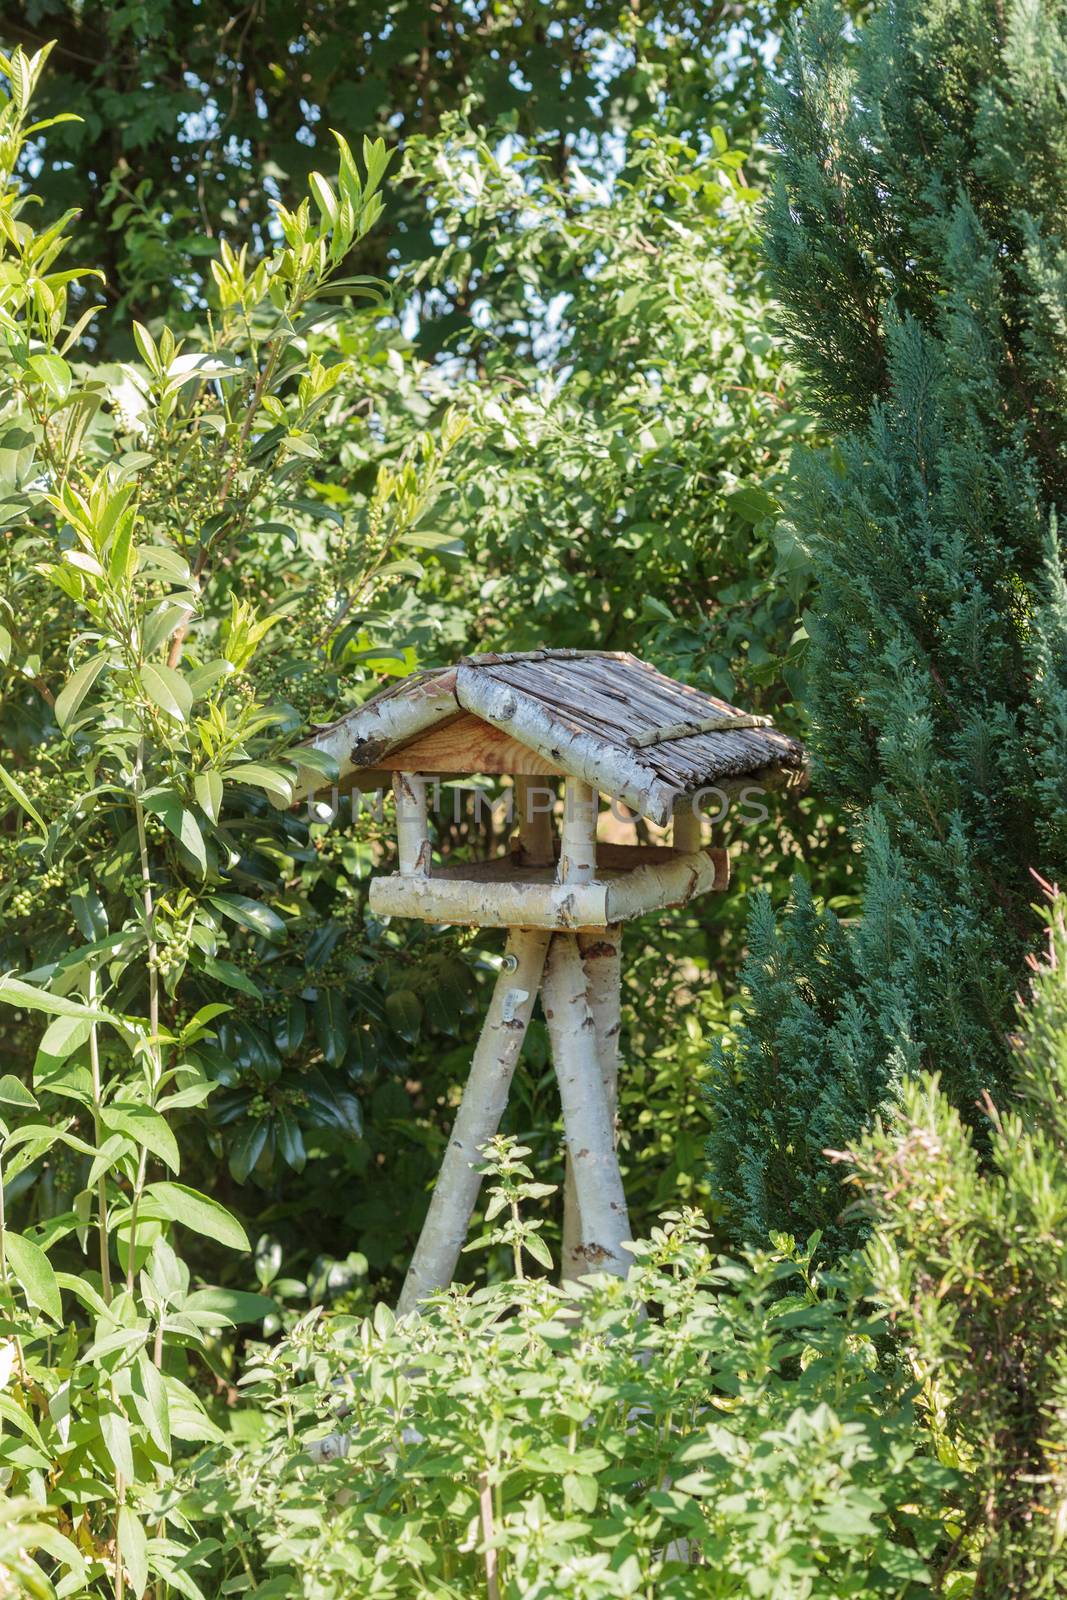 Rustic three-legged wooden bird table made from tree branches with sheltered platform and roof in sunlight surrounded by green trees and shrubs